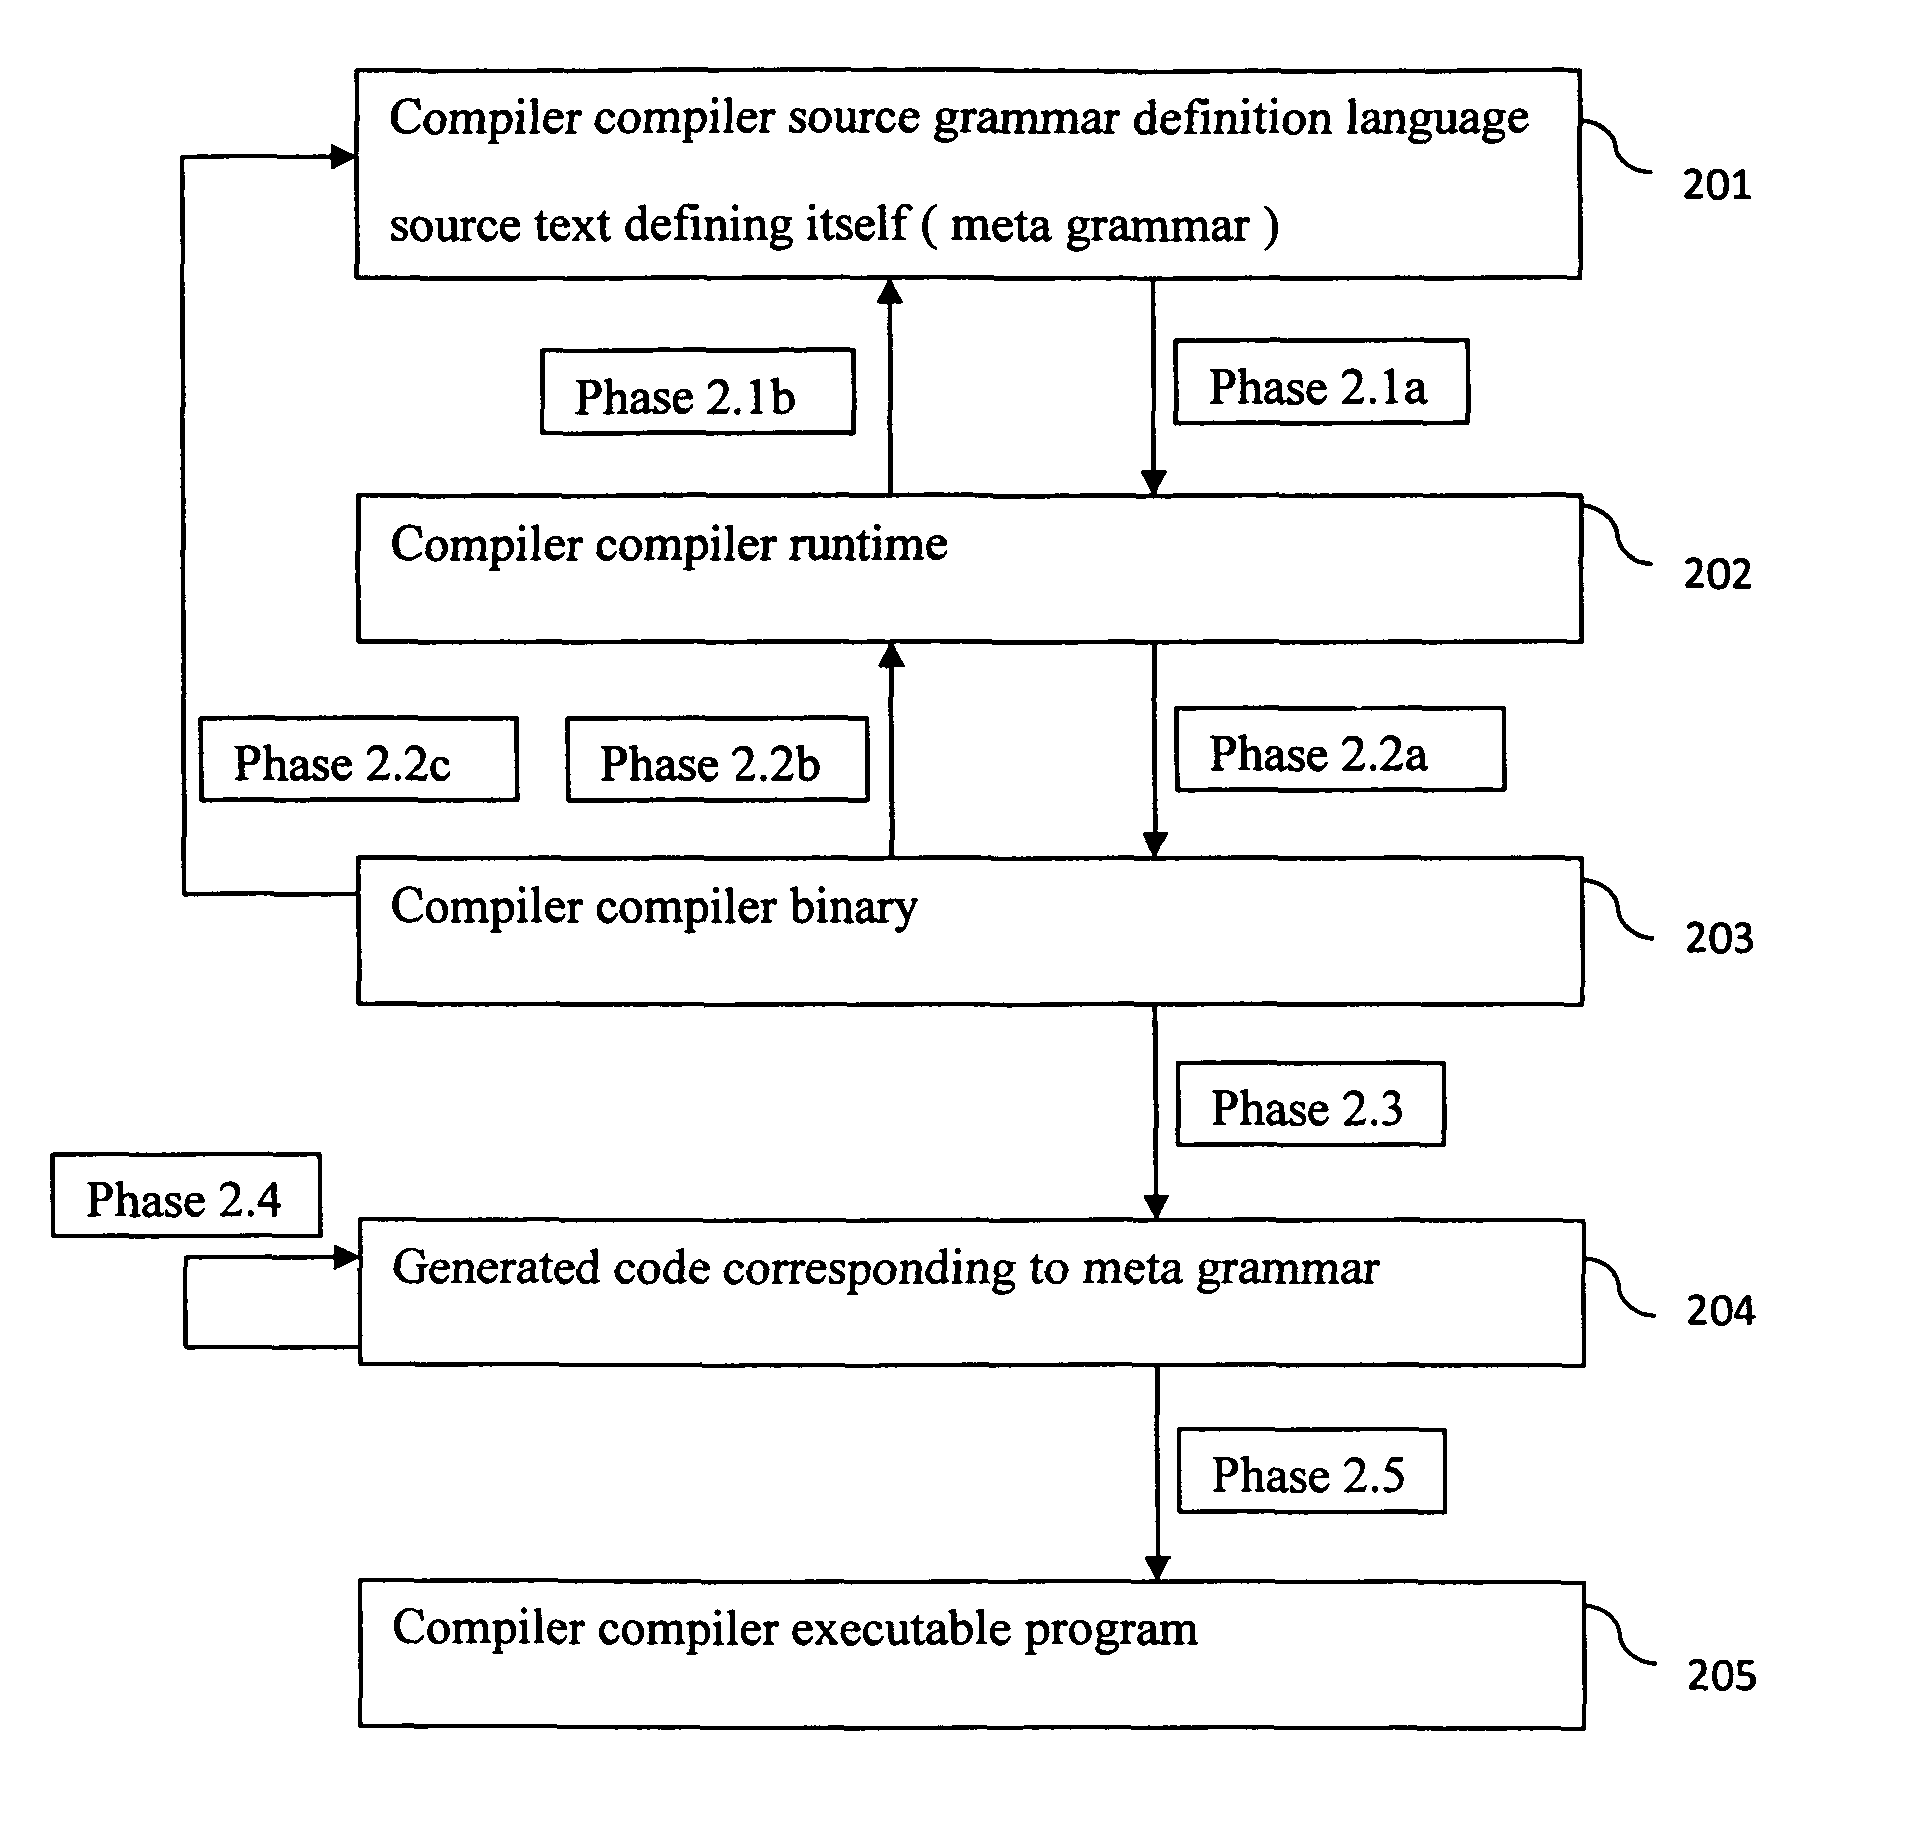 Compiler compiler system with syntax-controlled runtime and binary application programming interfaces